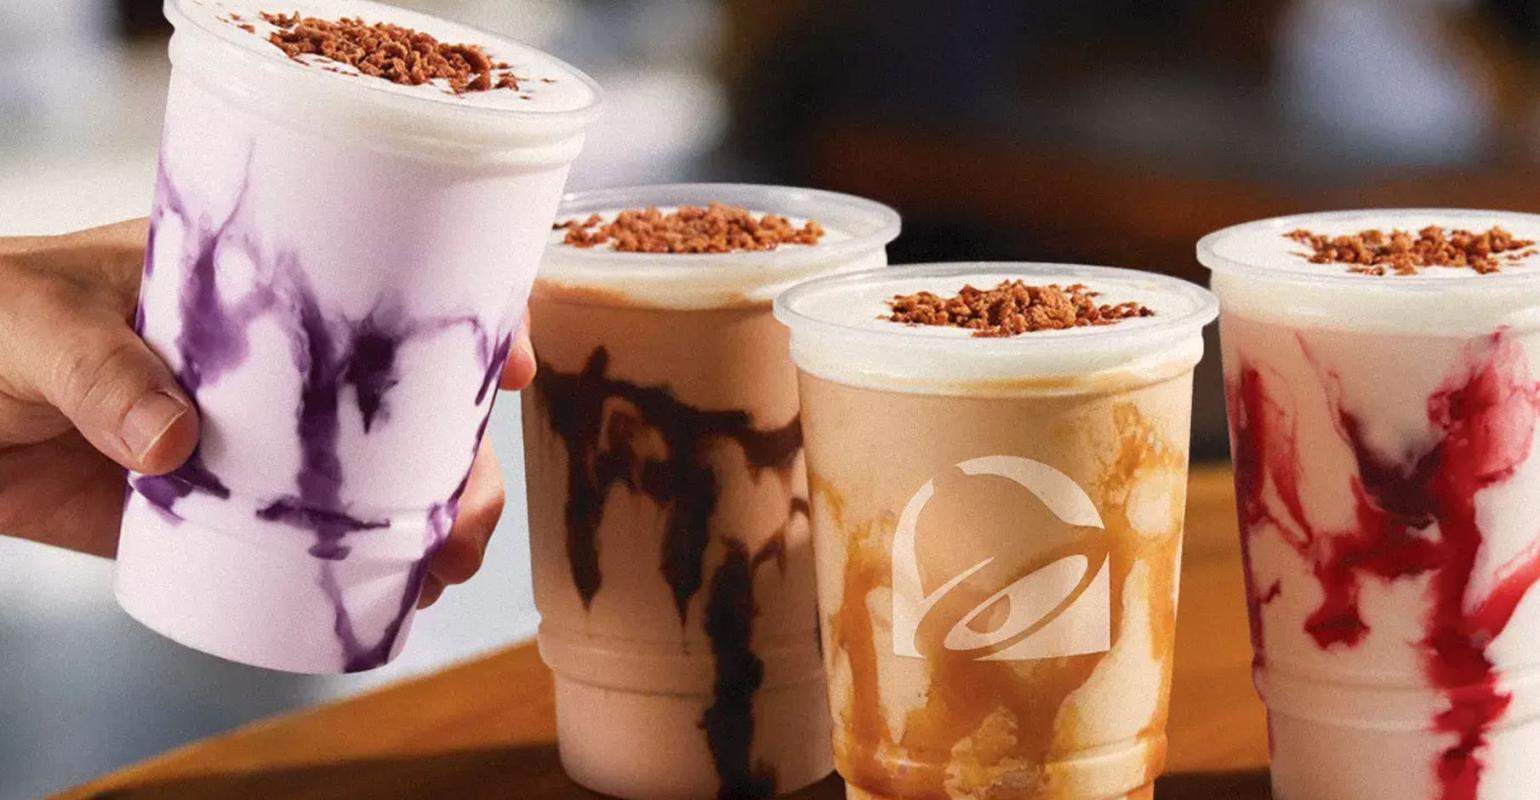 Taco Bell testing new menu items: Coffee Chillers, Churro Chillers